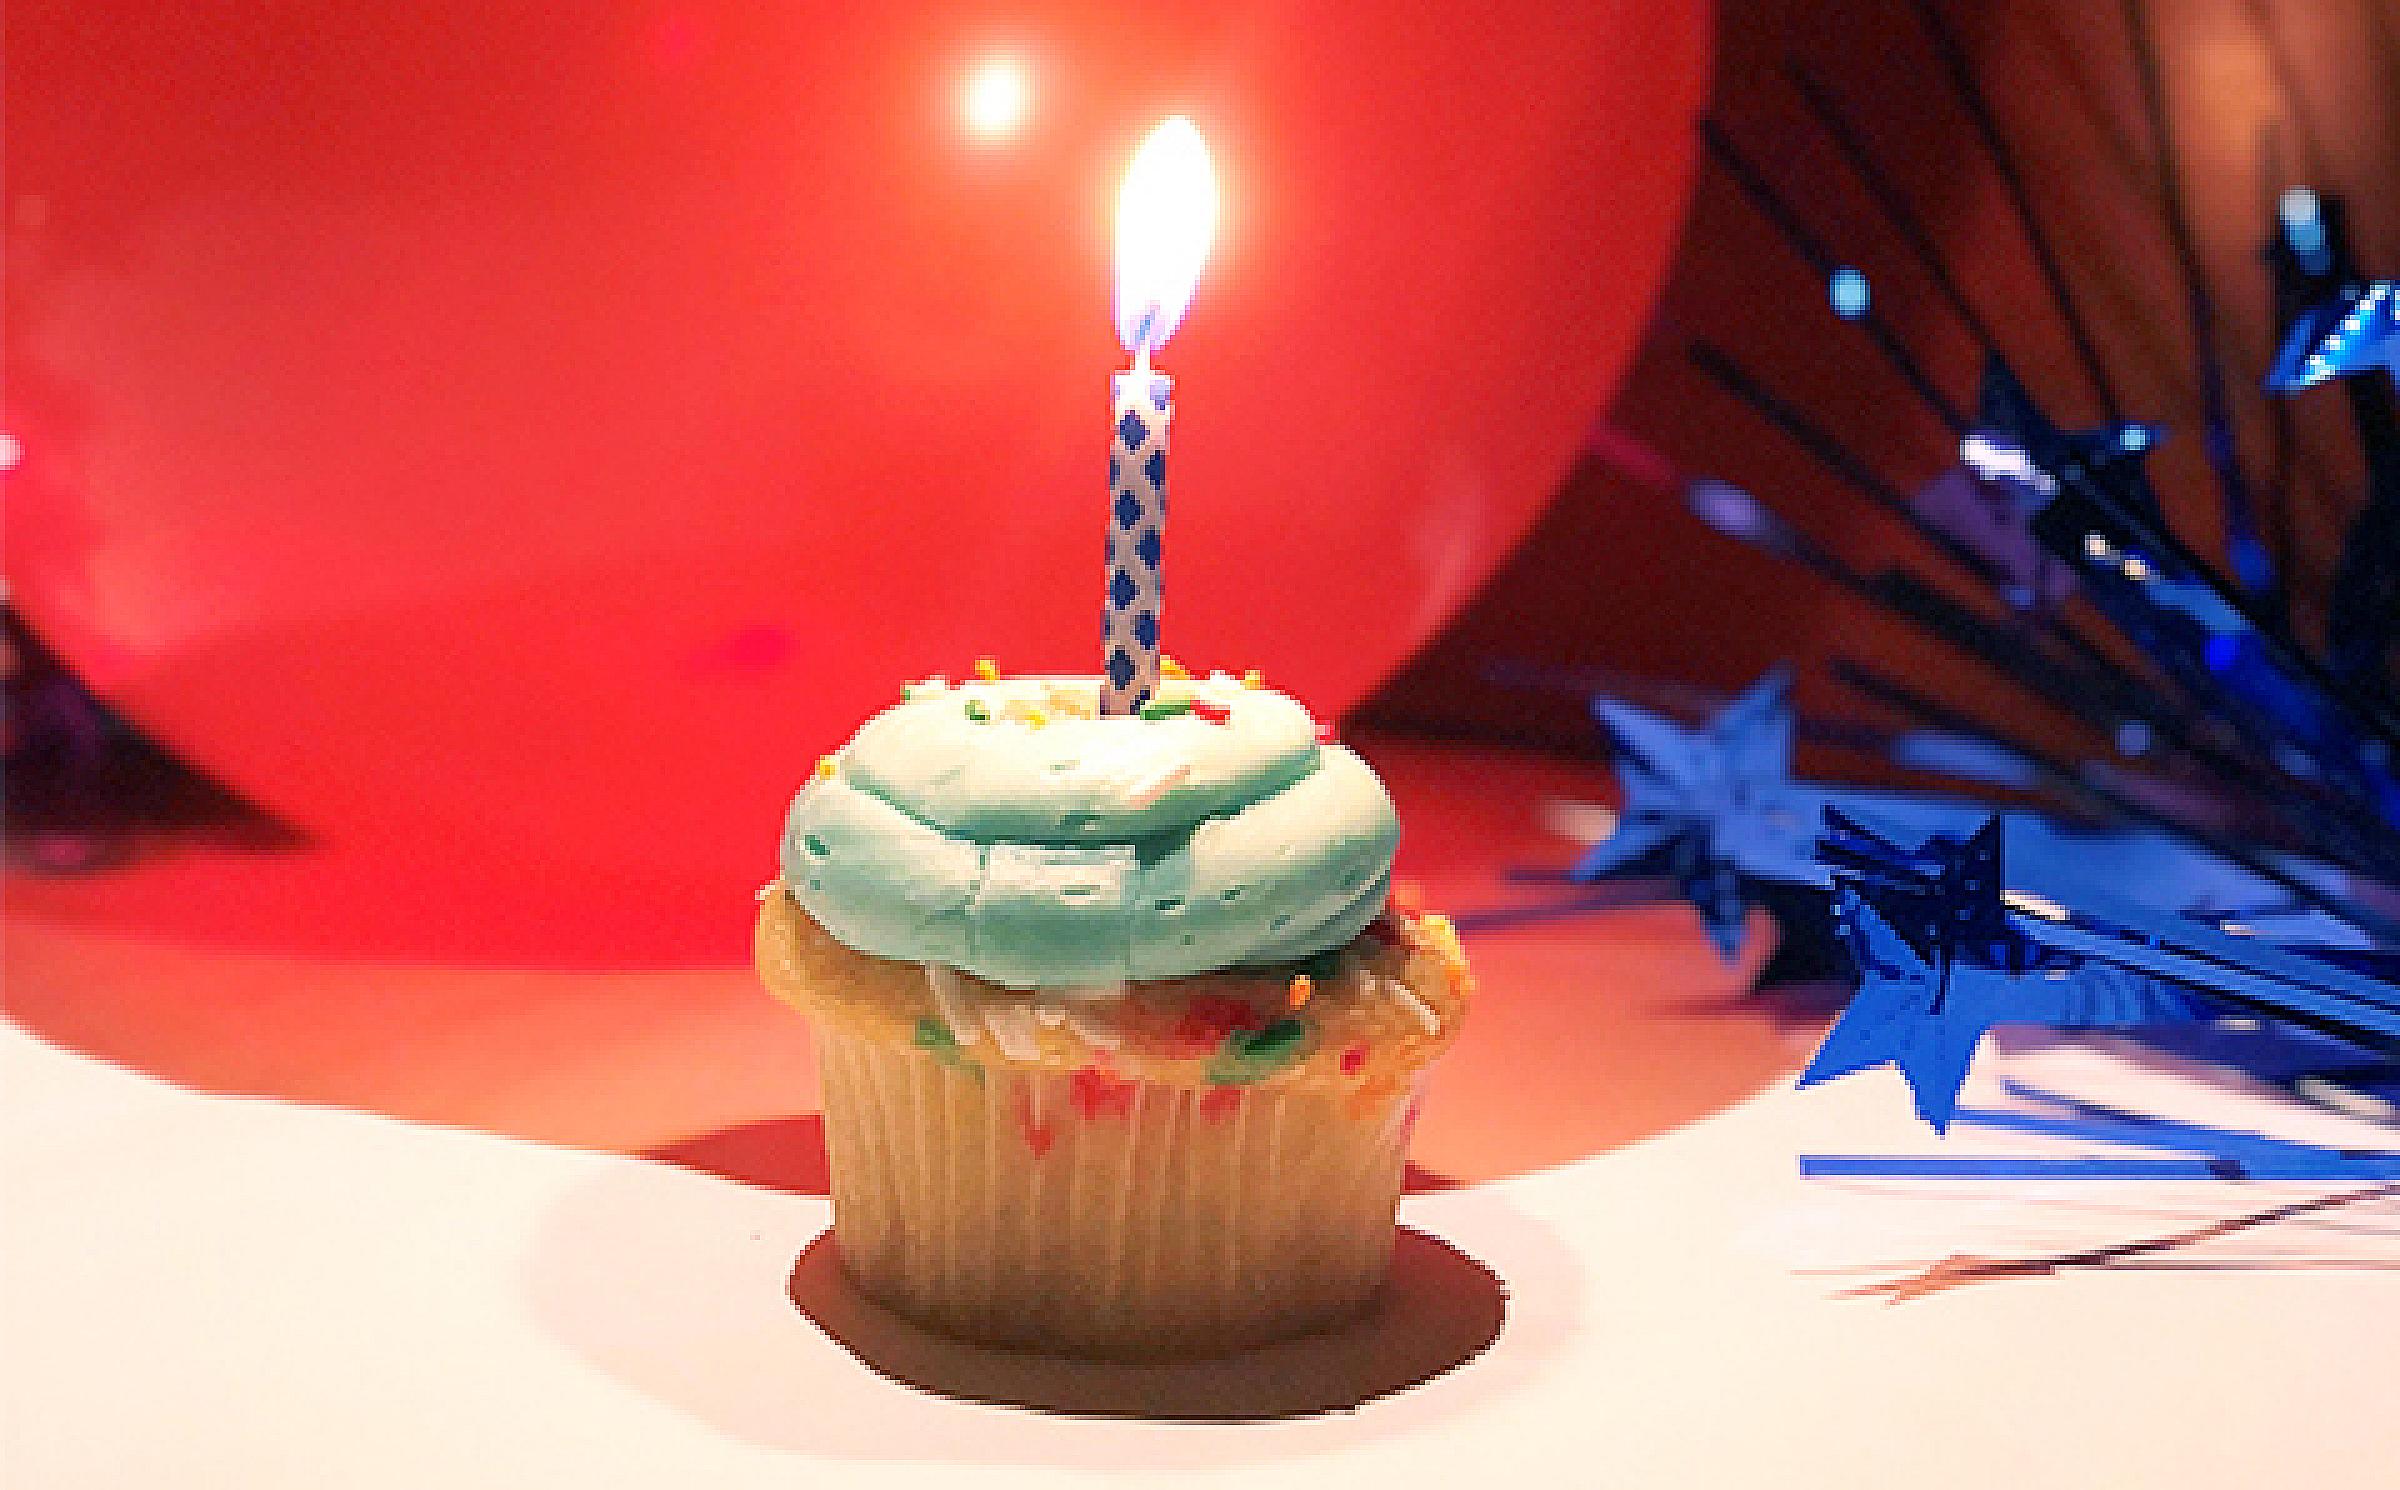 Birthday cupcake with candle and balloon